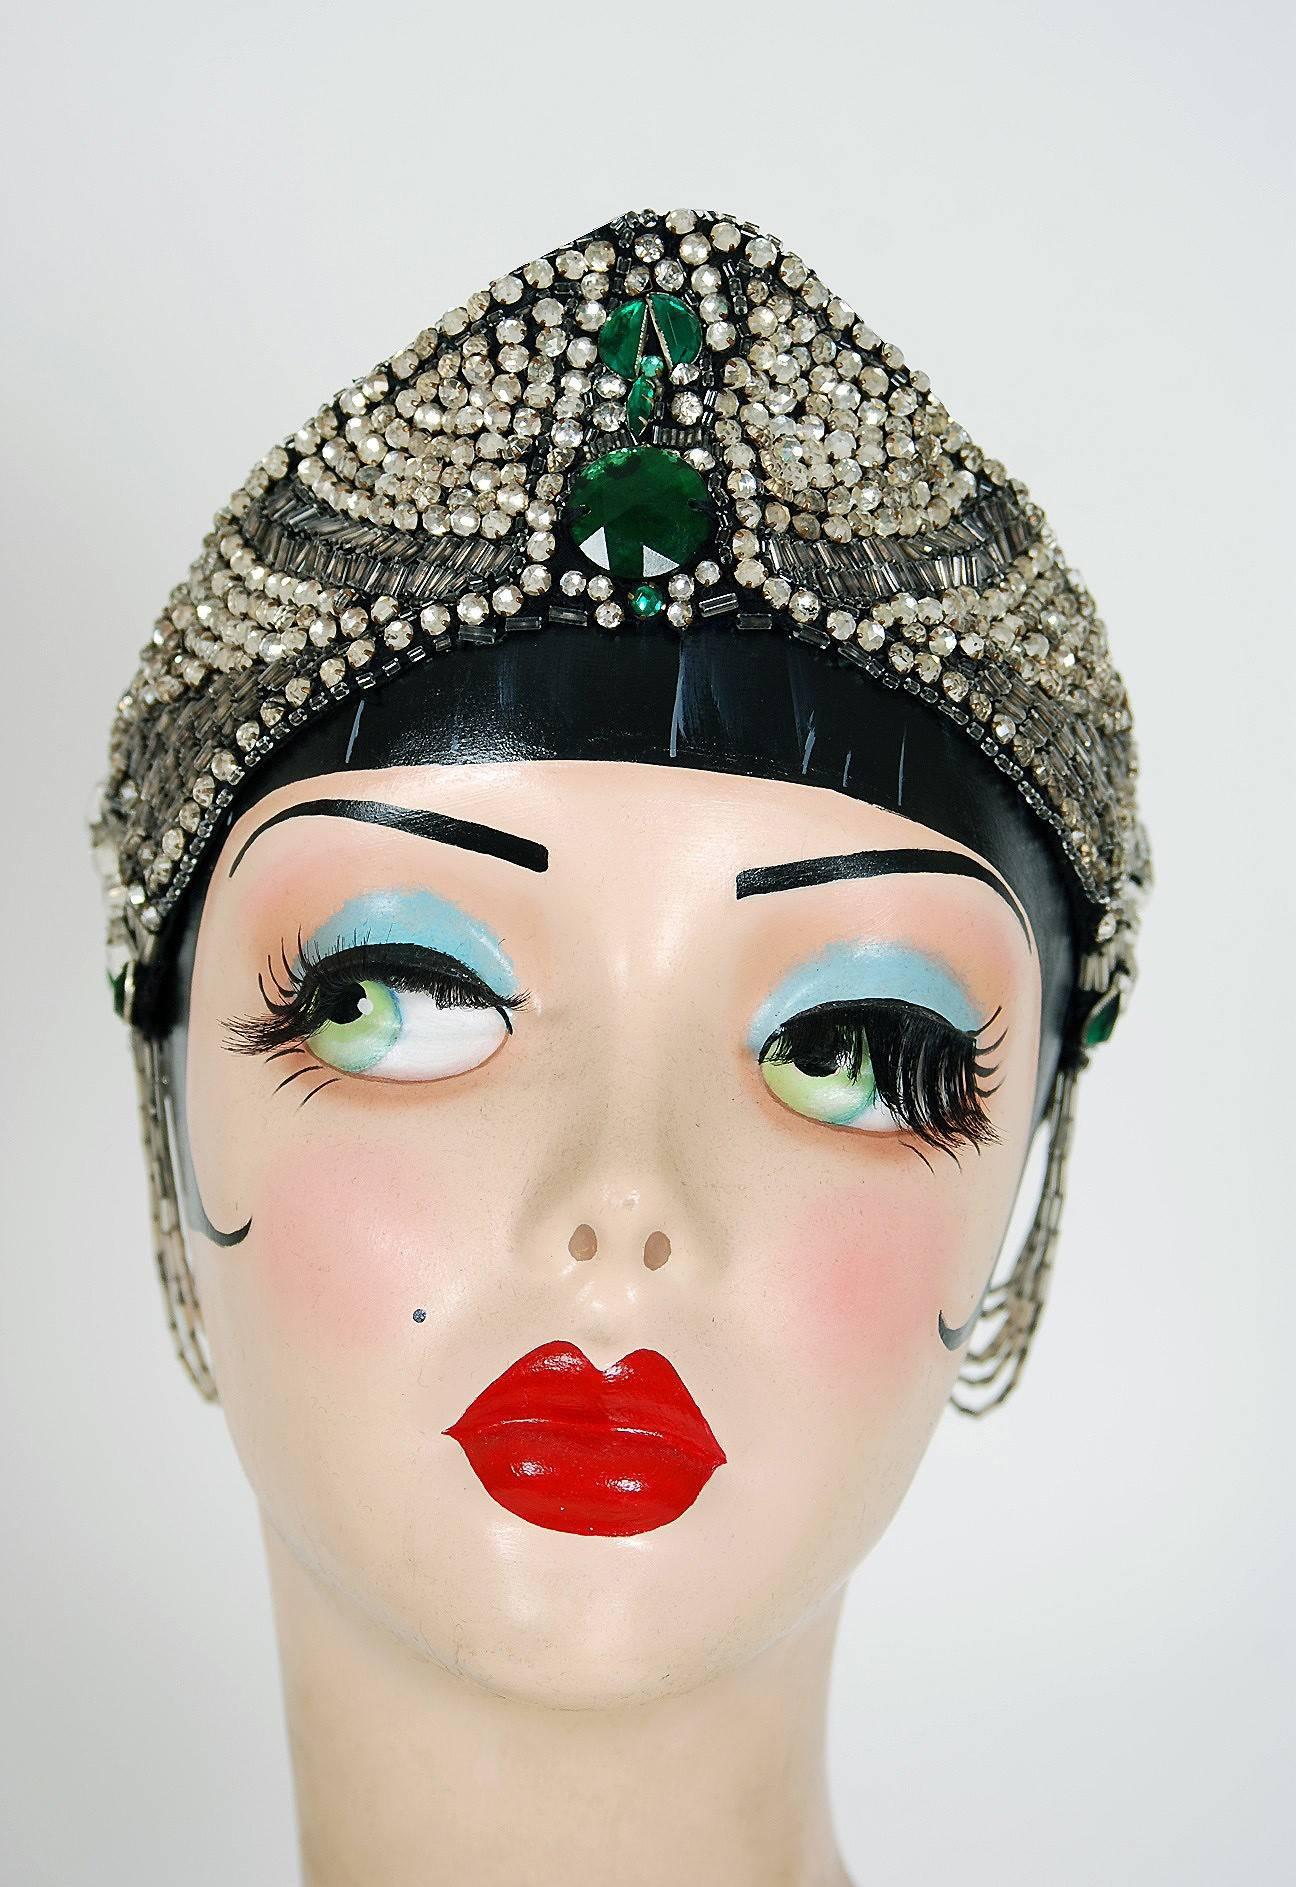 Breathtaking 1920's French couture emerald-green and clear jeweled flapper evening headpiece. This is, without a doubt, one of the most extraordinary antique crowns I have ever laid eyes on. Prong-set rhinestones and tube glass-beads with tons of